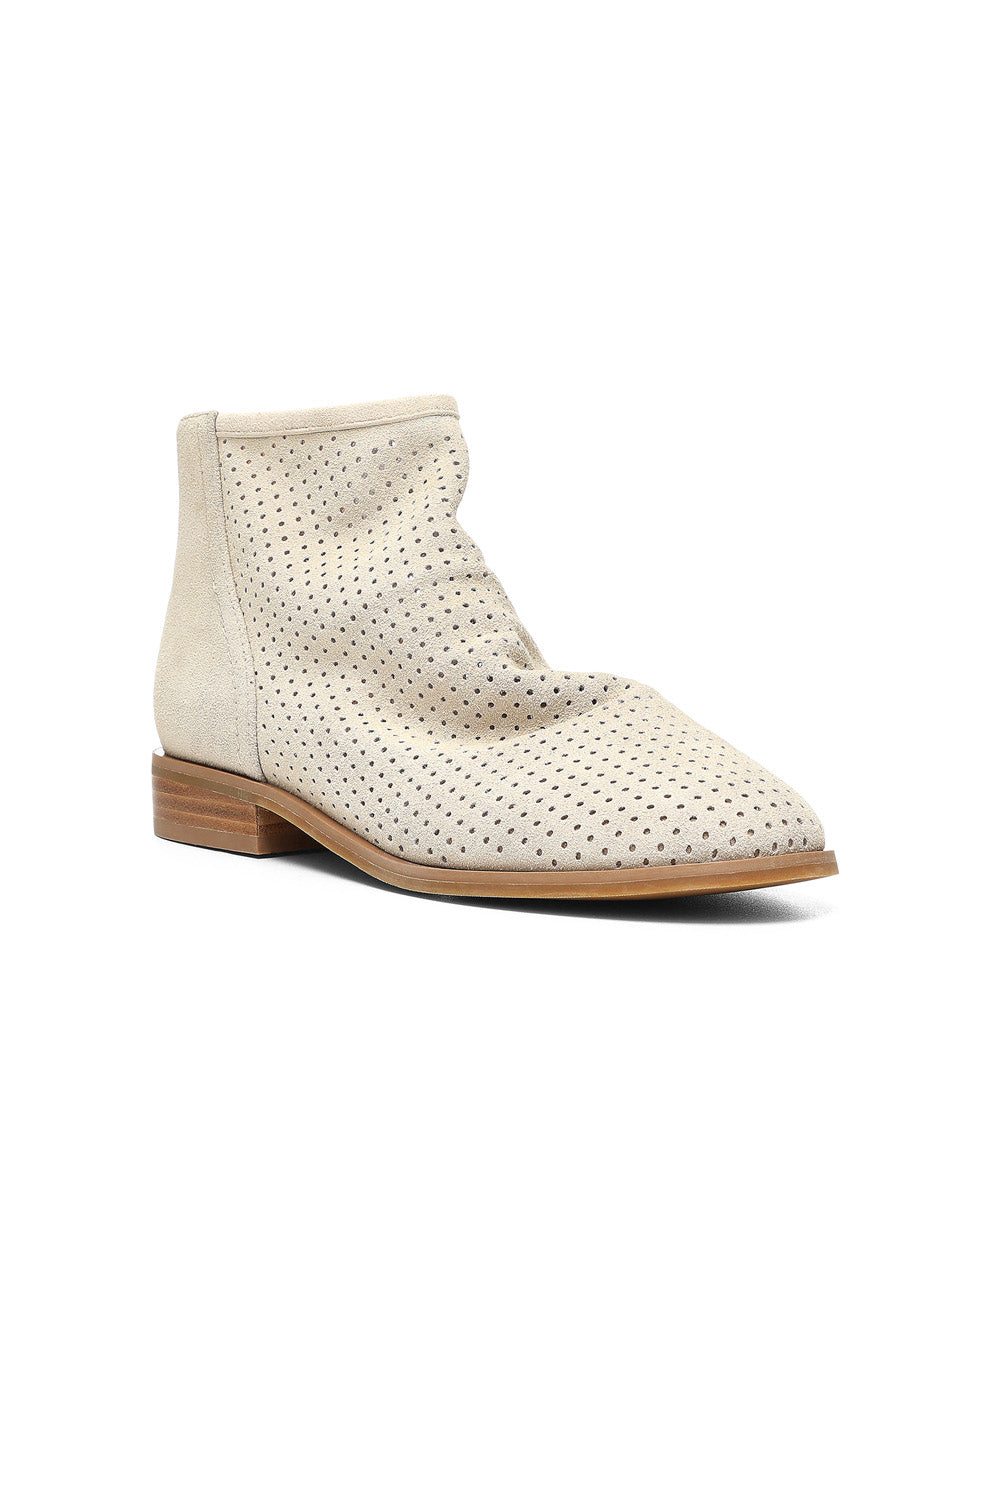 NYDJ Cailian Booties In Suede - Sand